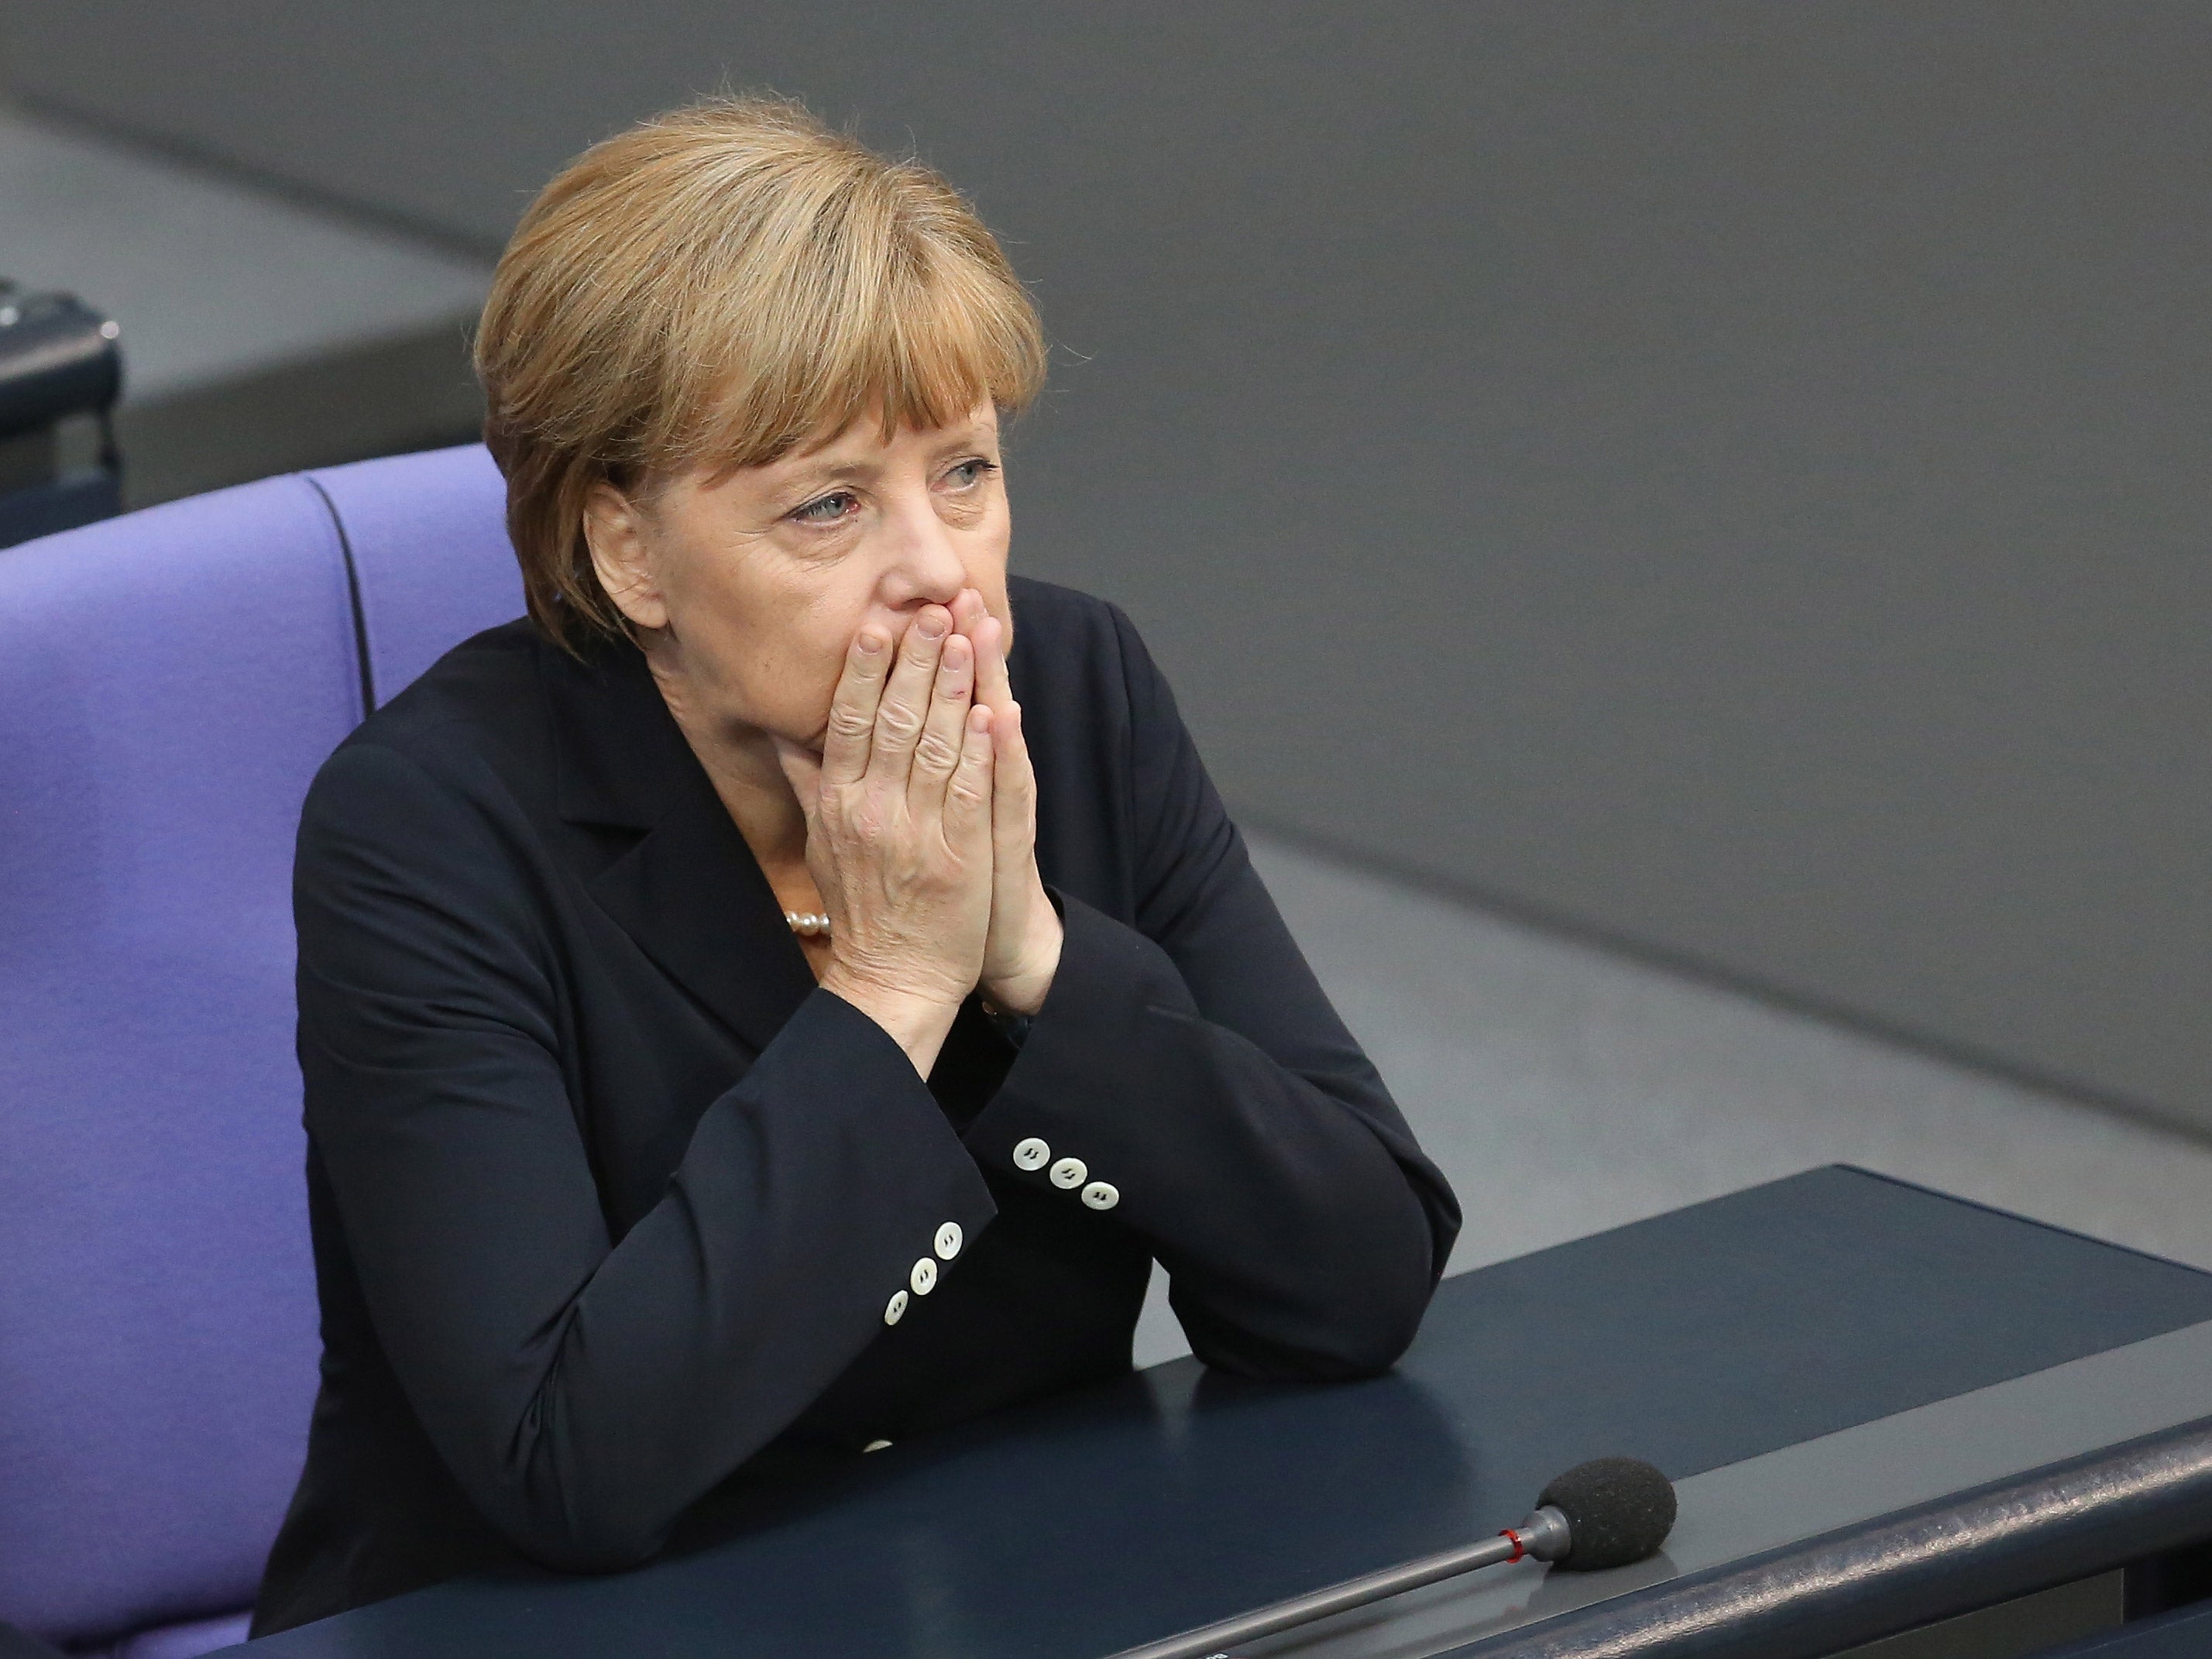 The German Chancellor is the daughter of a Lutheran minister and member of the evangelical church (Getty)